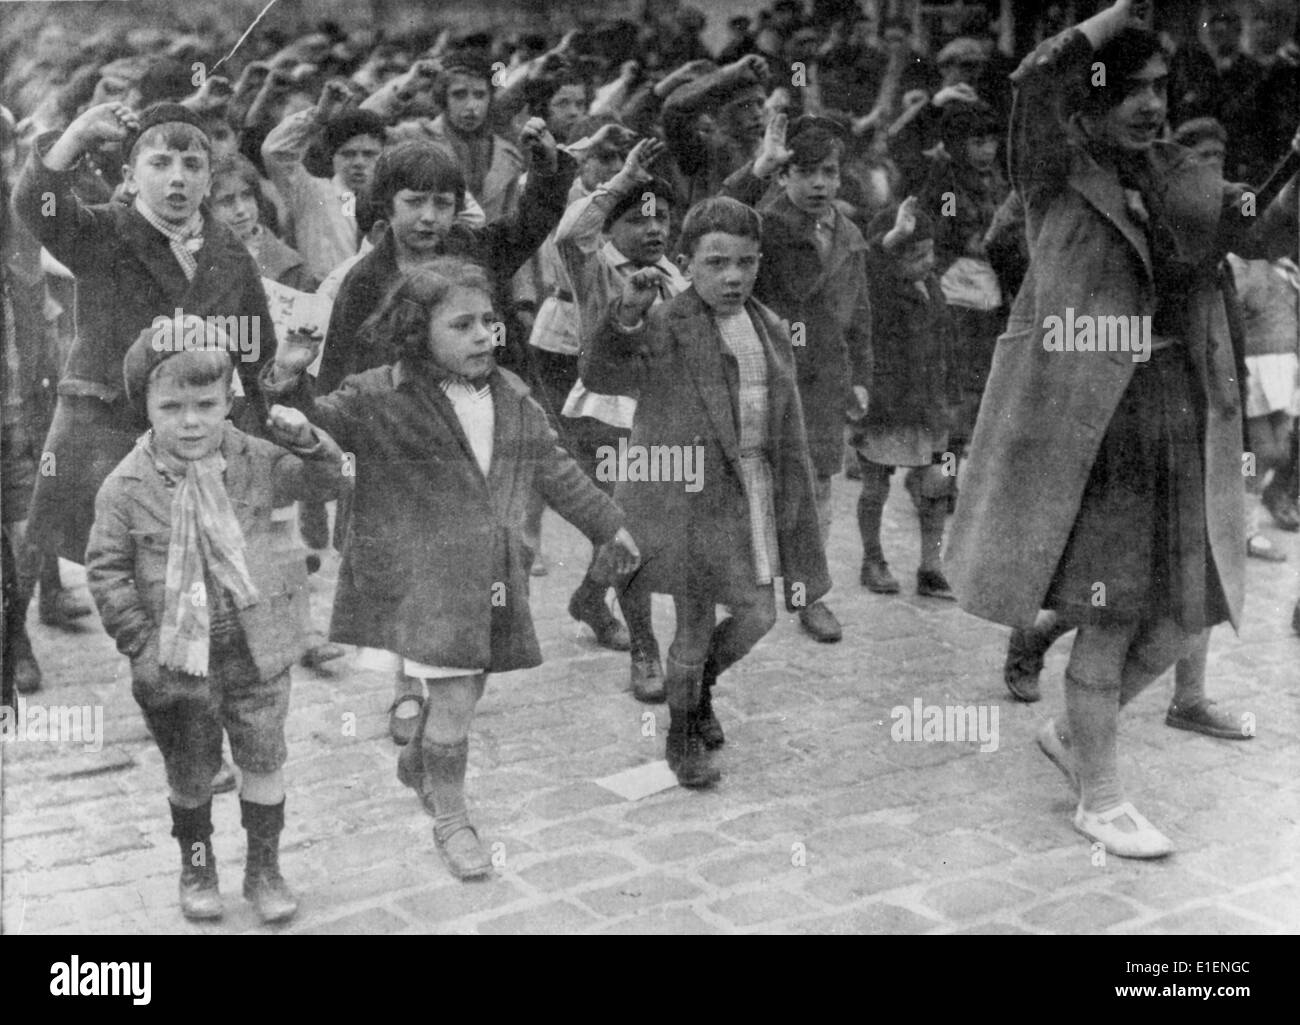 Boys and girls show the communist salute, raised arm with fist, during a march in Paris, 1936. The Front Populaire - a union of left-wing French political parties - wons the elections in May 1936 and formed a new government under Prime Minister Leon Blum. Fotoarchiv für Zeitgeschichtee - NO WIRE SERVICE Stock Photo